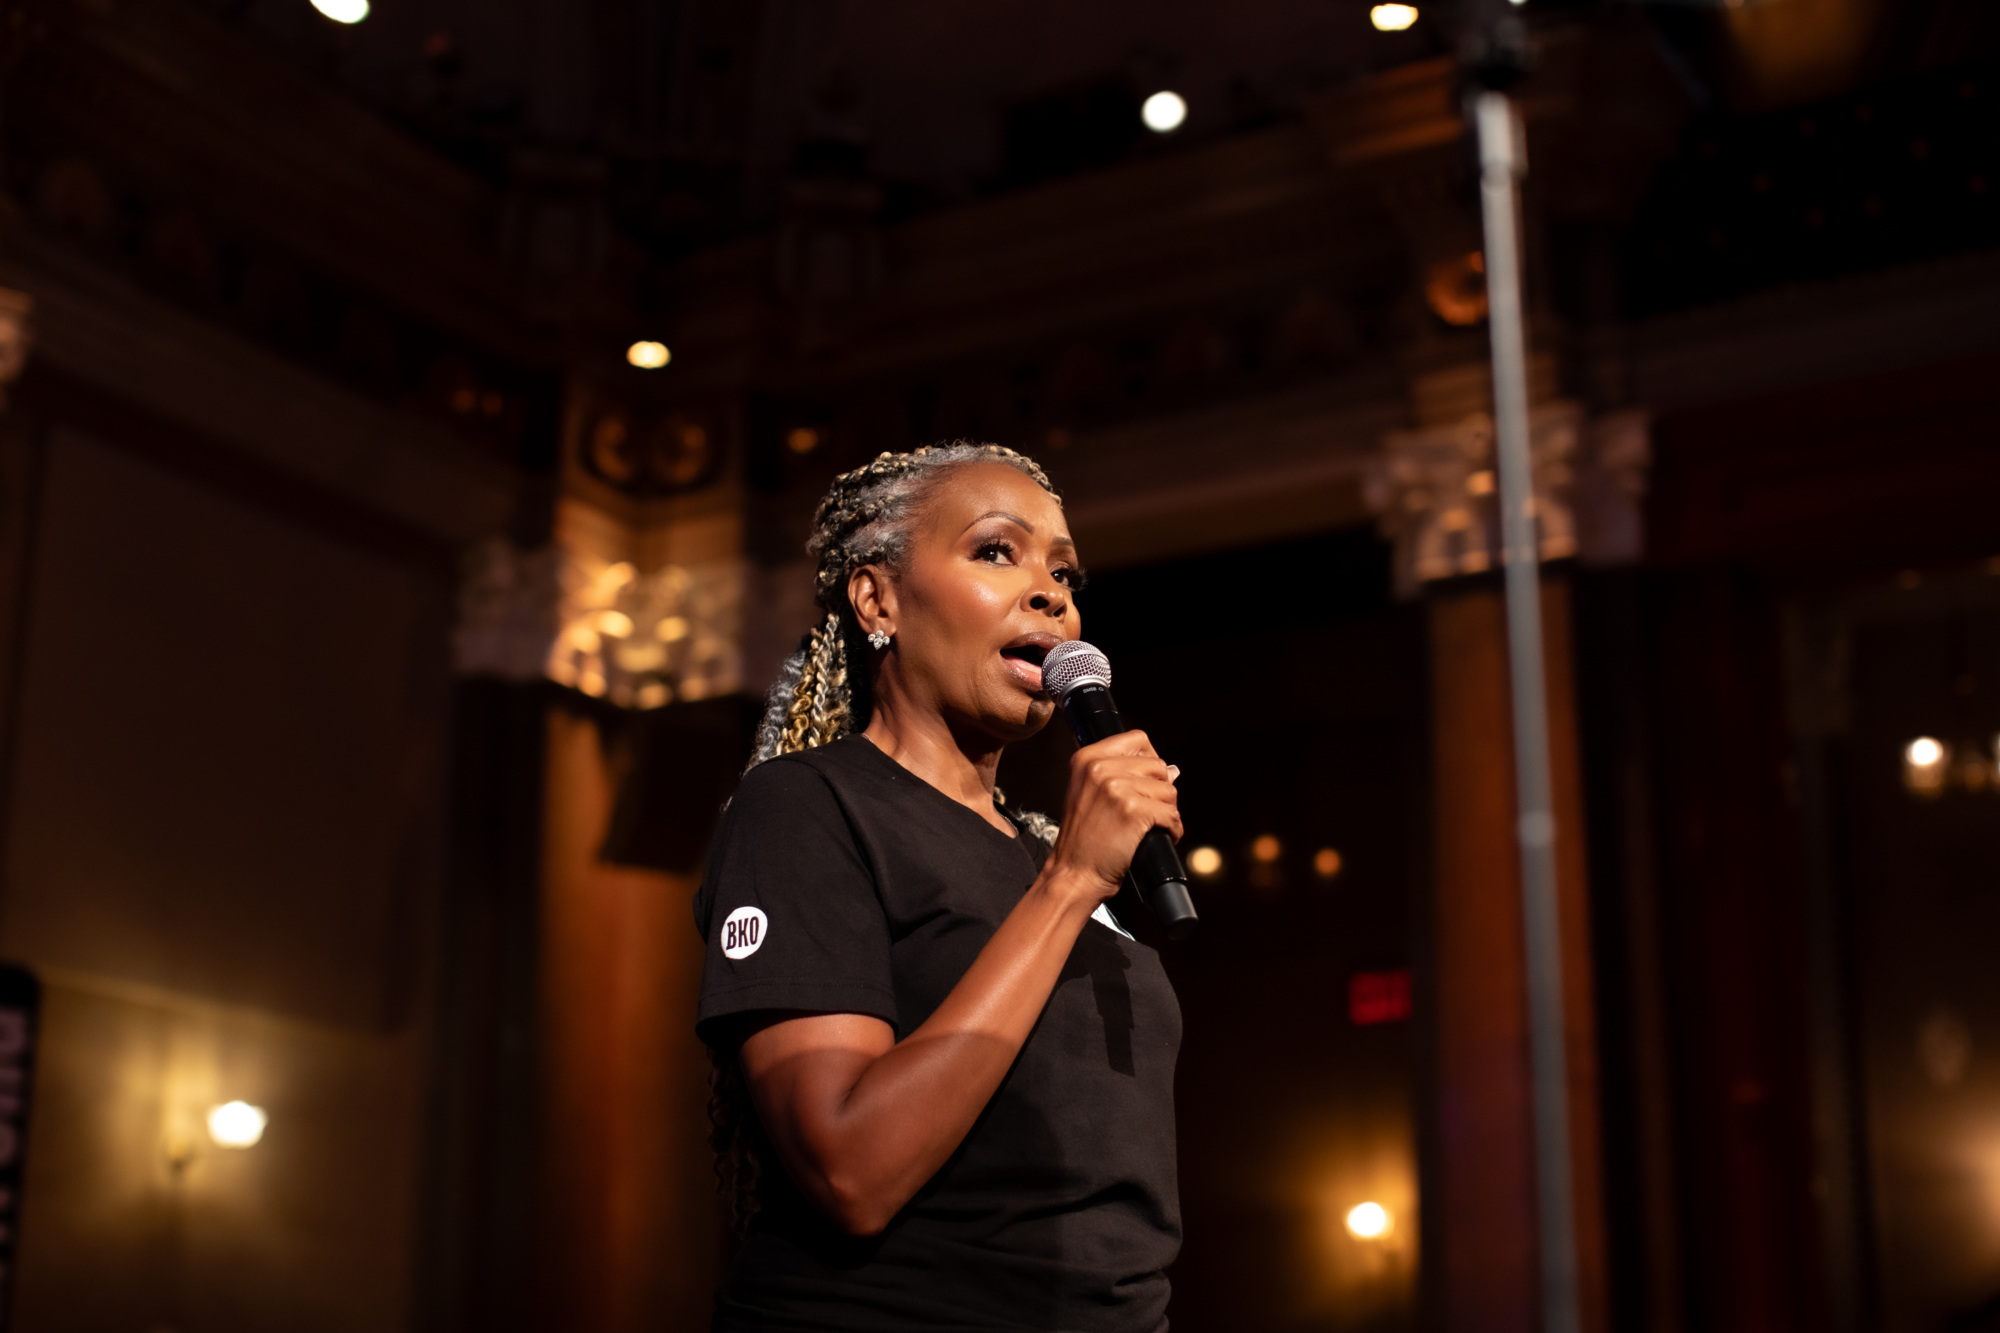 A woman in a black shirt is speaking into a microphone.